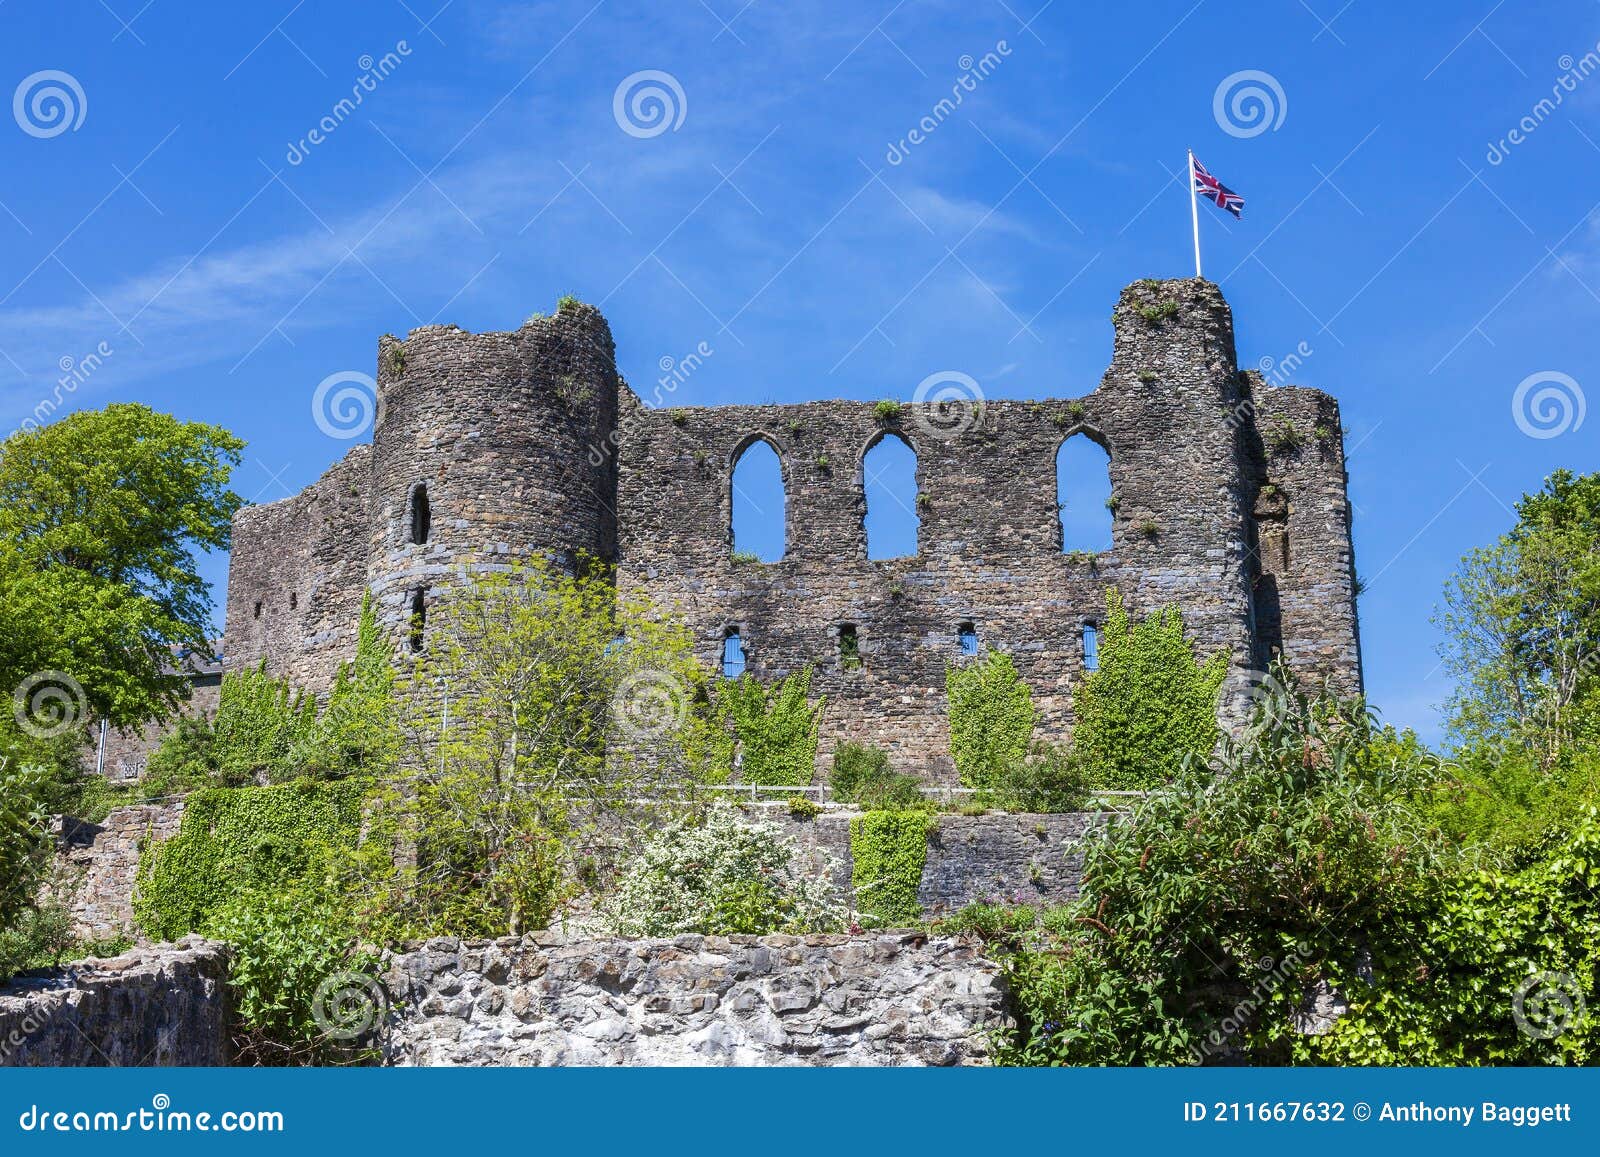 laugharne castle in carmarthenshire south wales uk